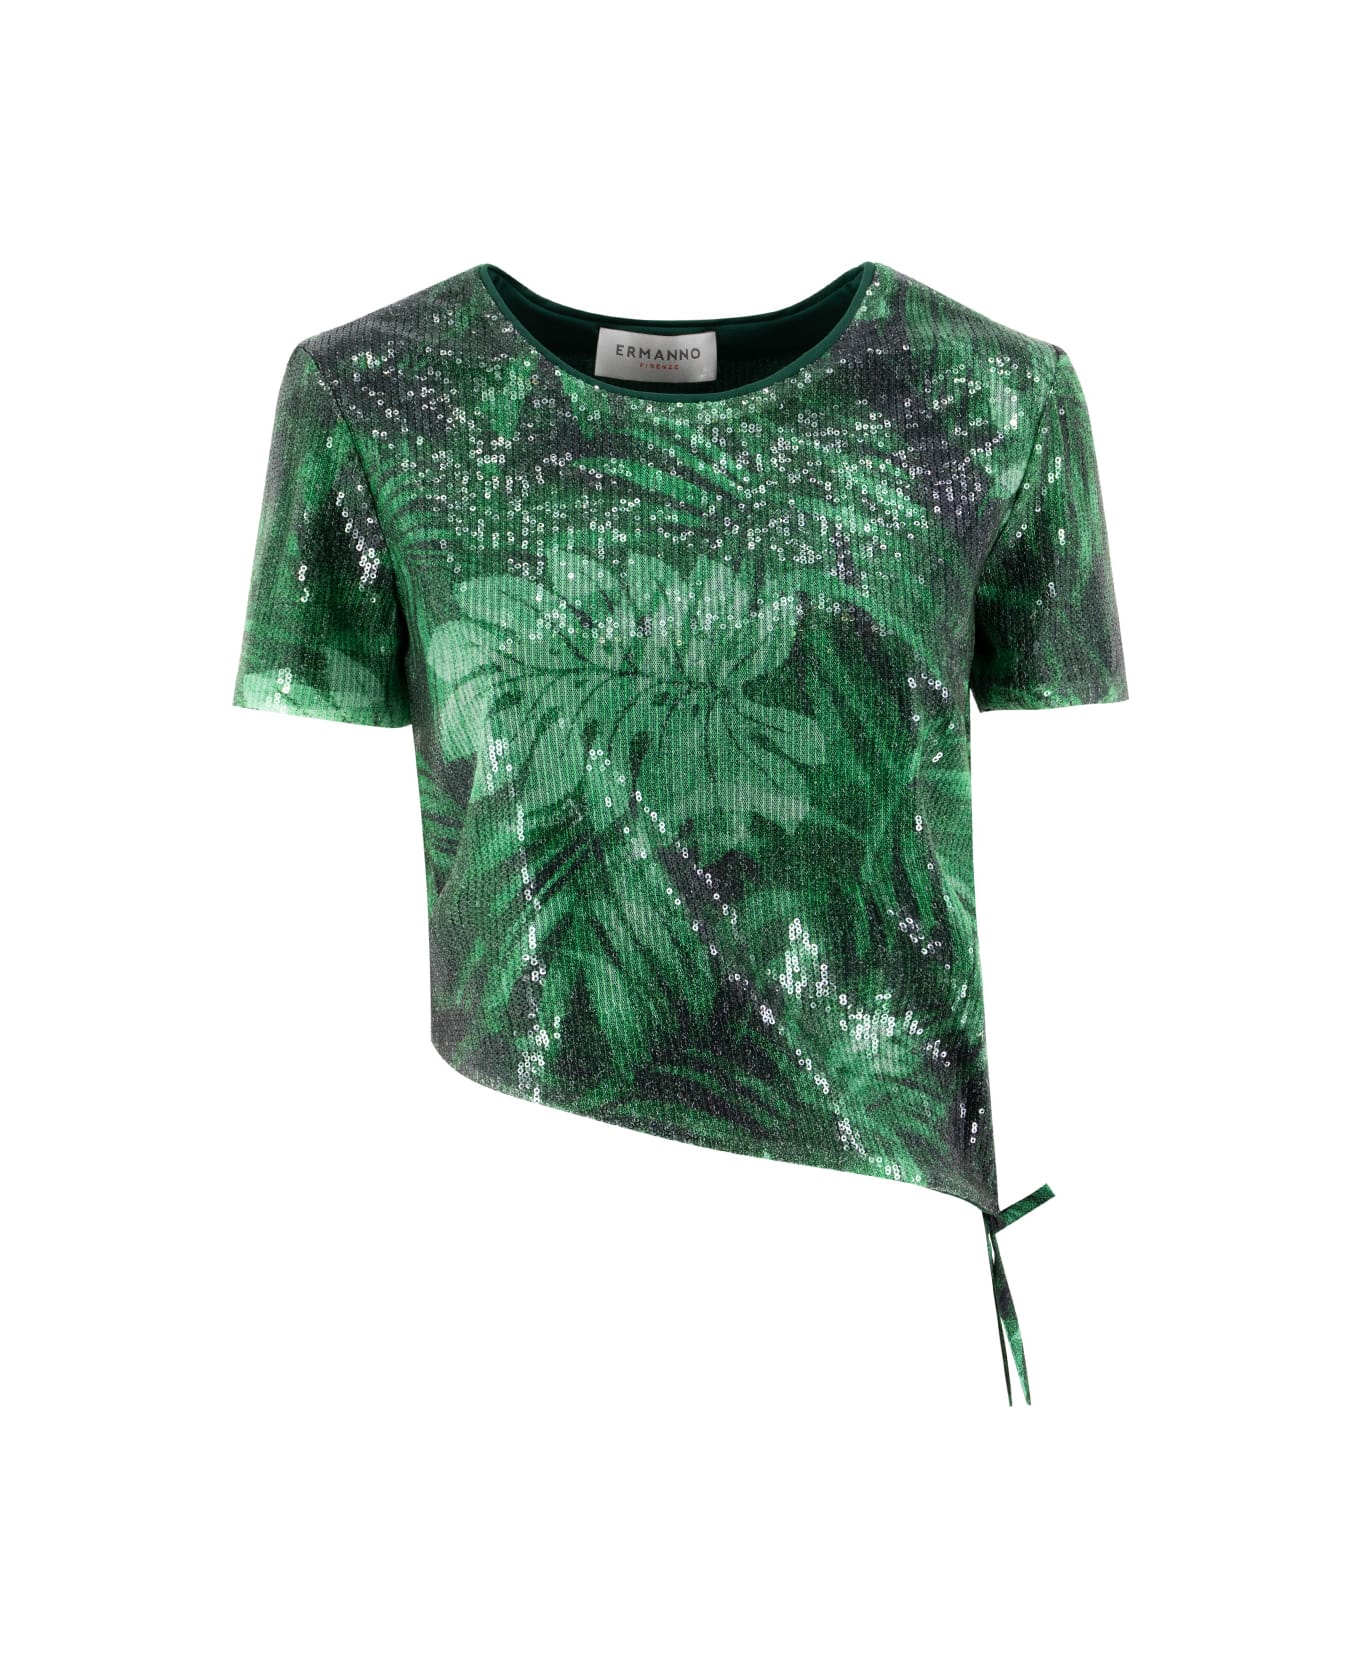 Ermanno Firenze T-shirt - GREEN/BLACK/OFF WH Tシャツ